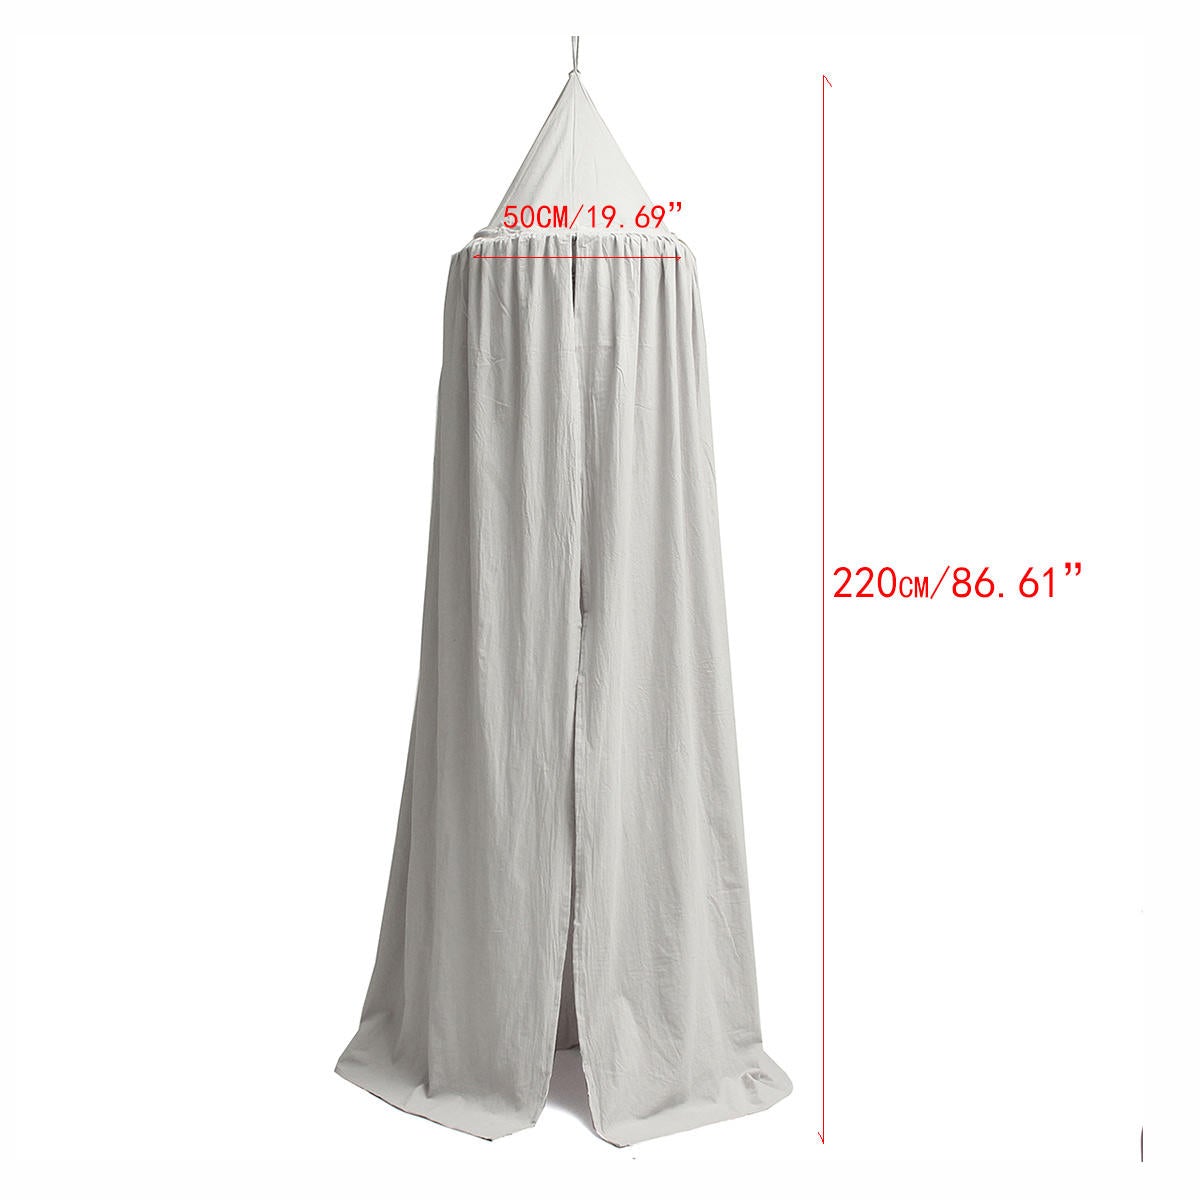 Child Baby Bed Canopy Netting Bedcover Mosquito Net Curtain Bedding Dome Tent